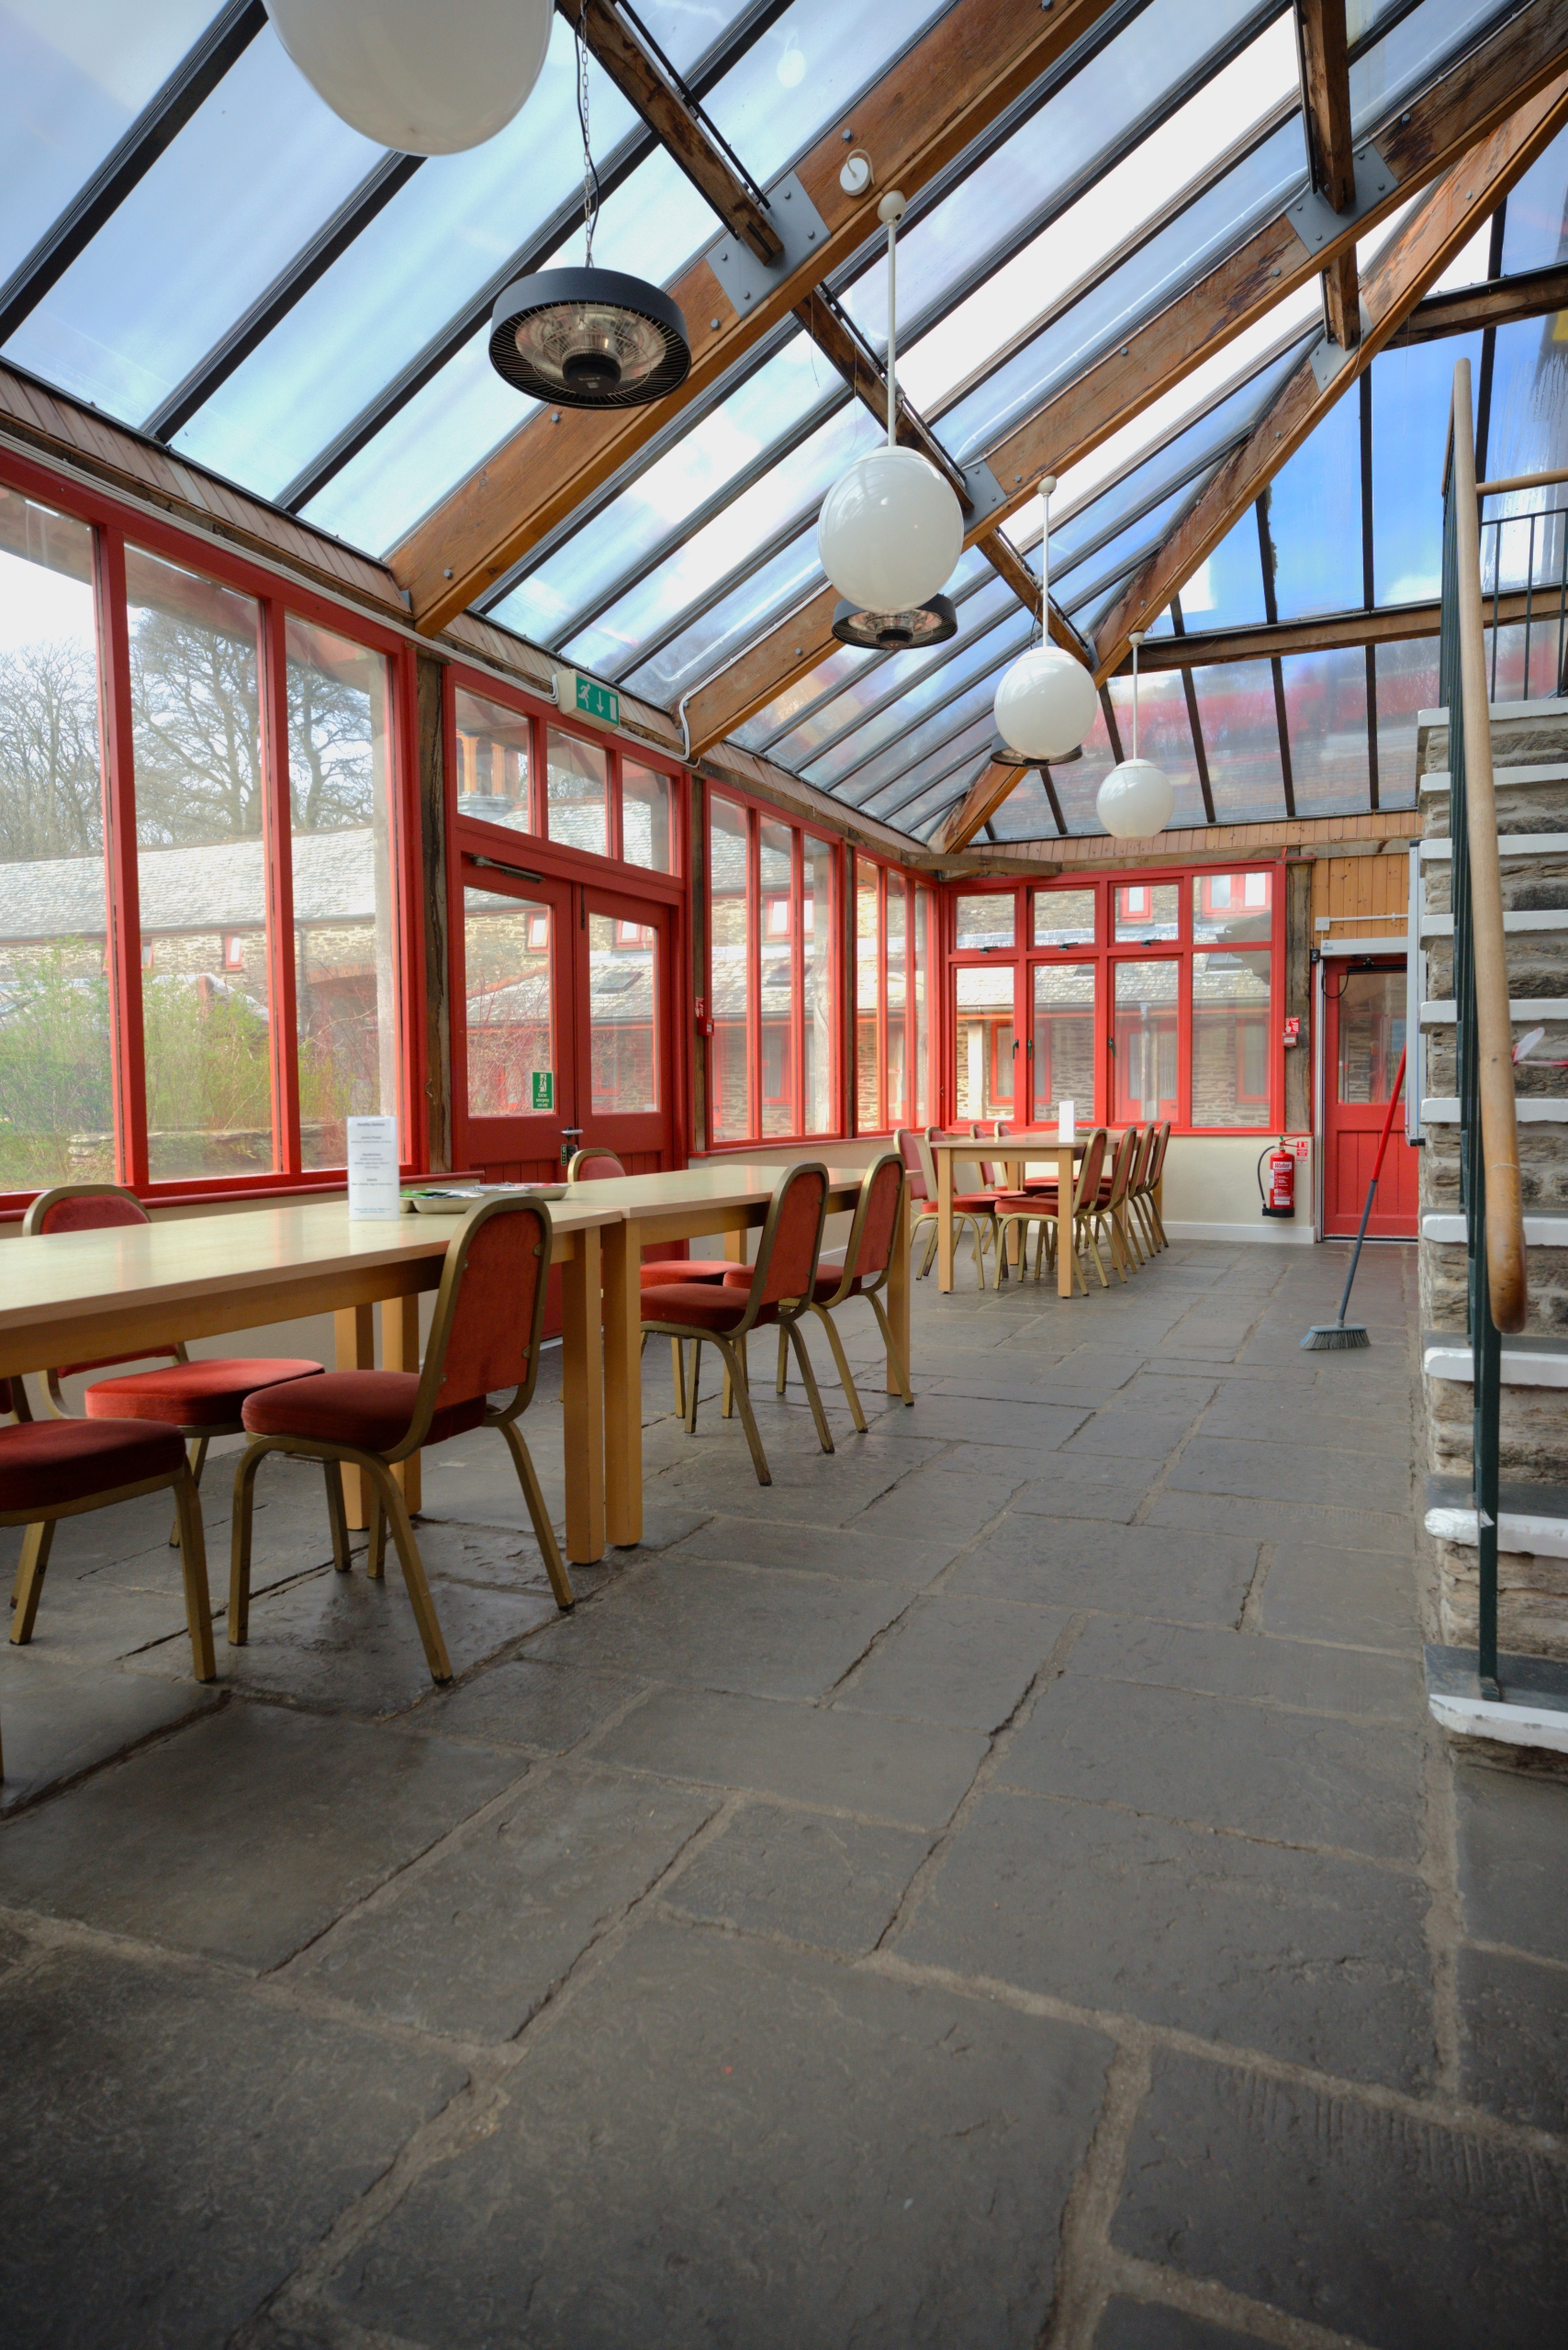 A naturally lit conservatory room, with a set of stairs to the right and tables with chairs on the left set up like a dining room.